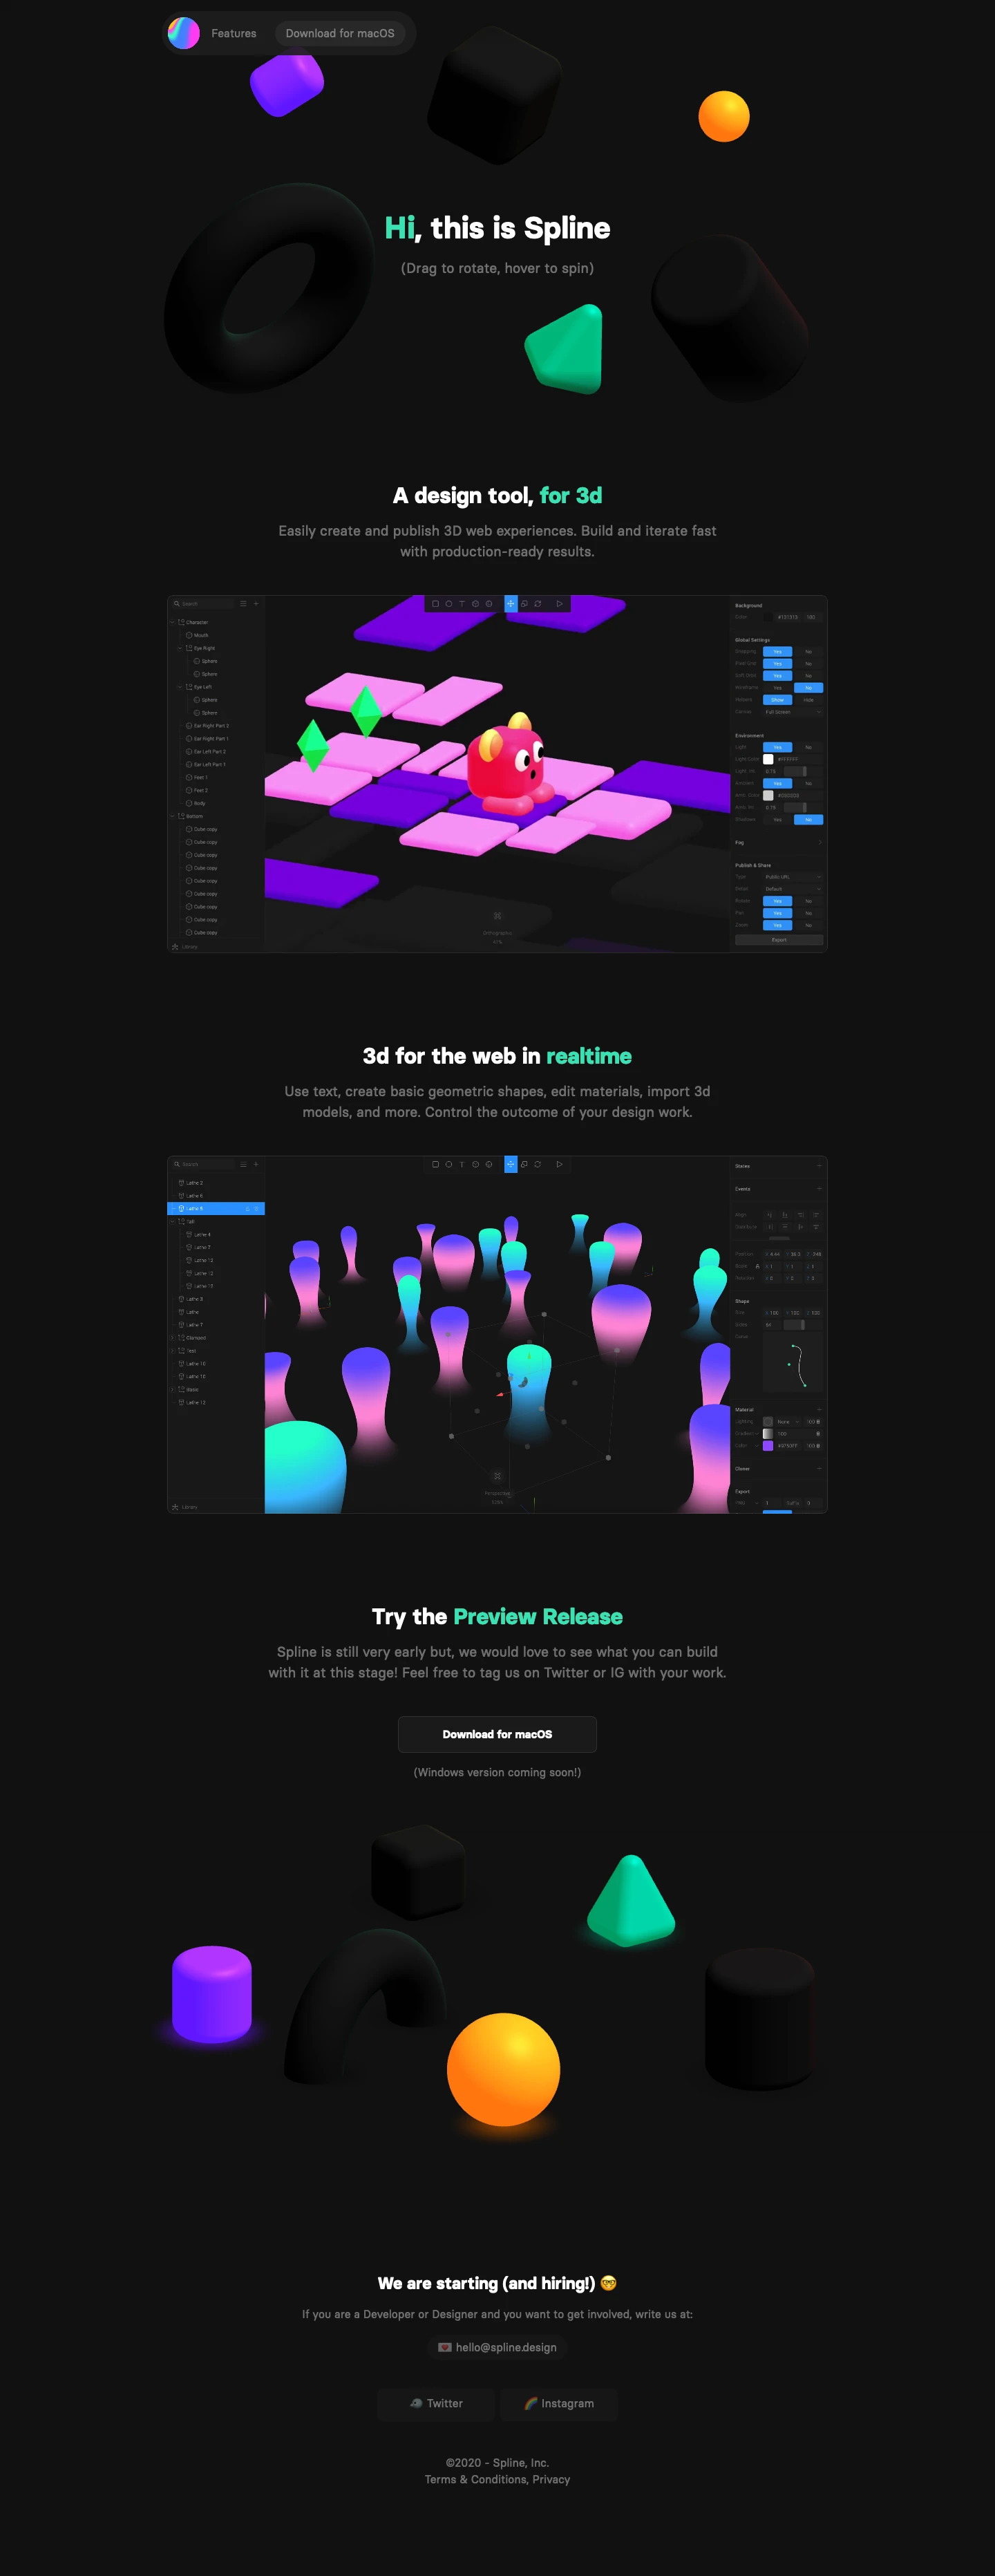 Spline Landing Page Example: A design tool, for 3D. Easily create and publish 3D web experiences. Build and iterate fast with production-ready results.